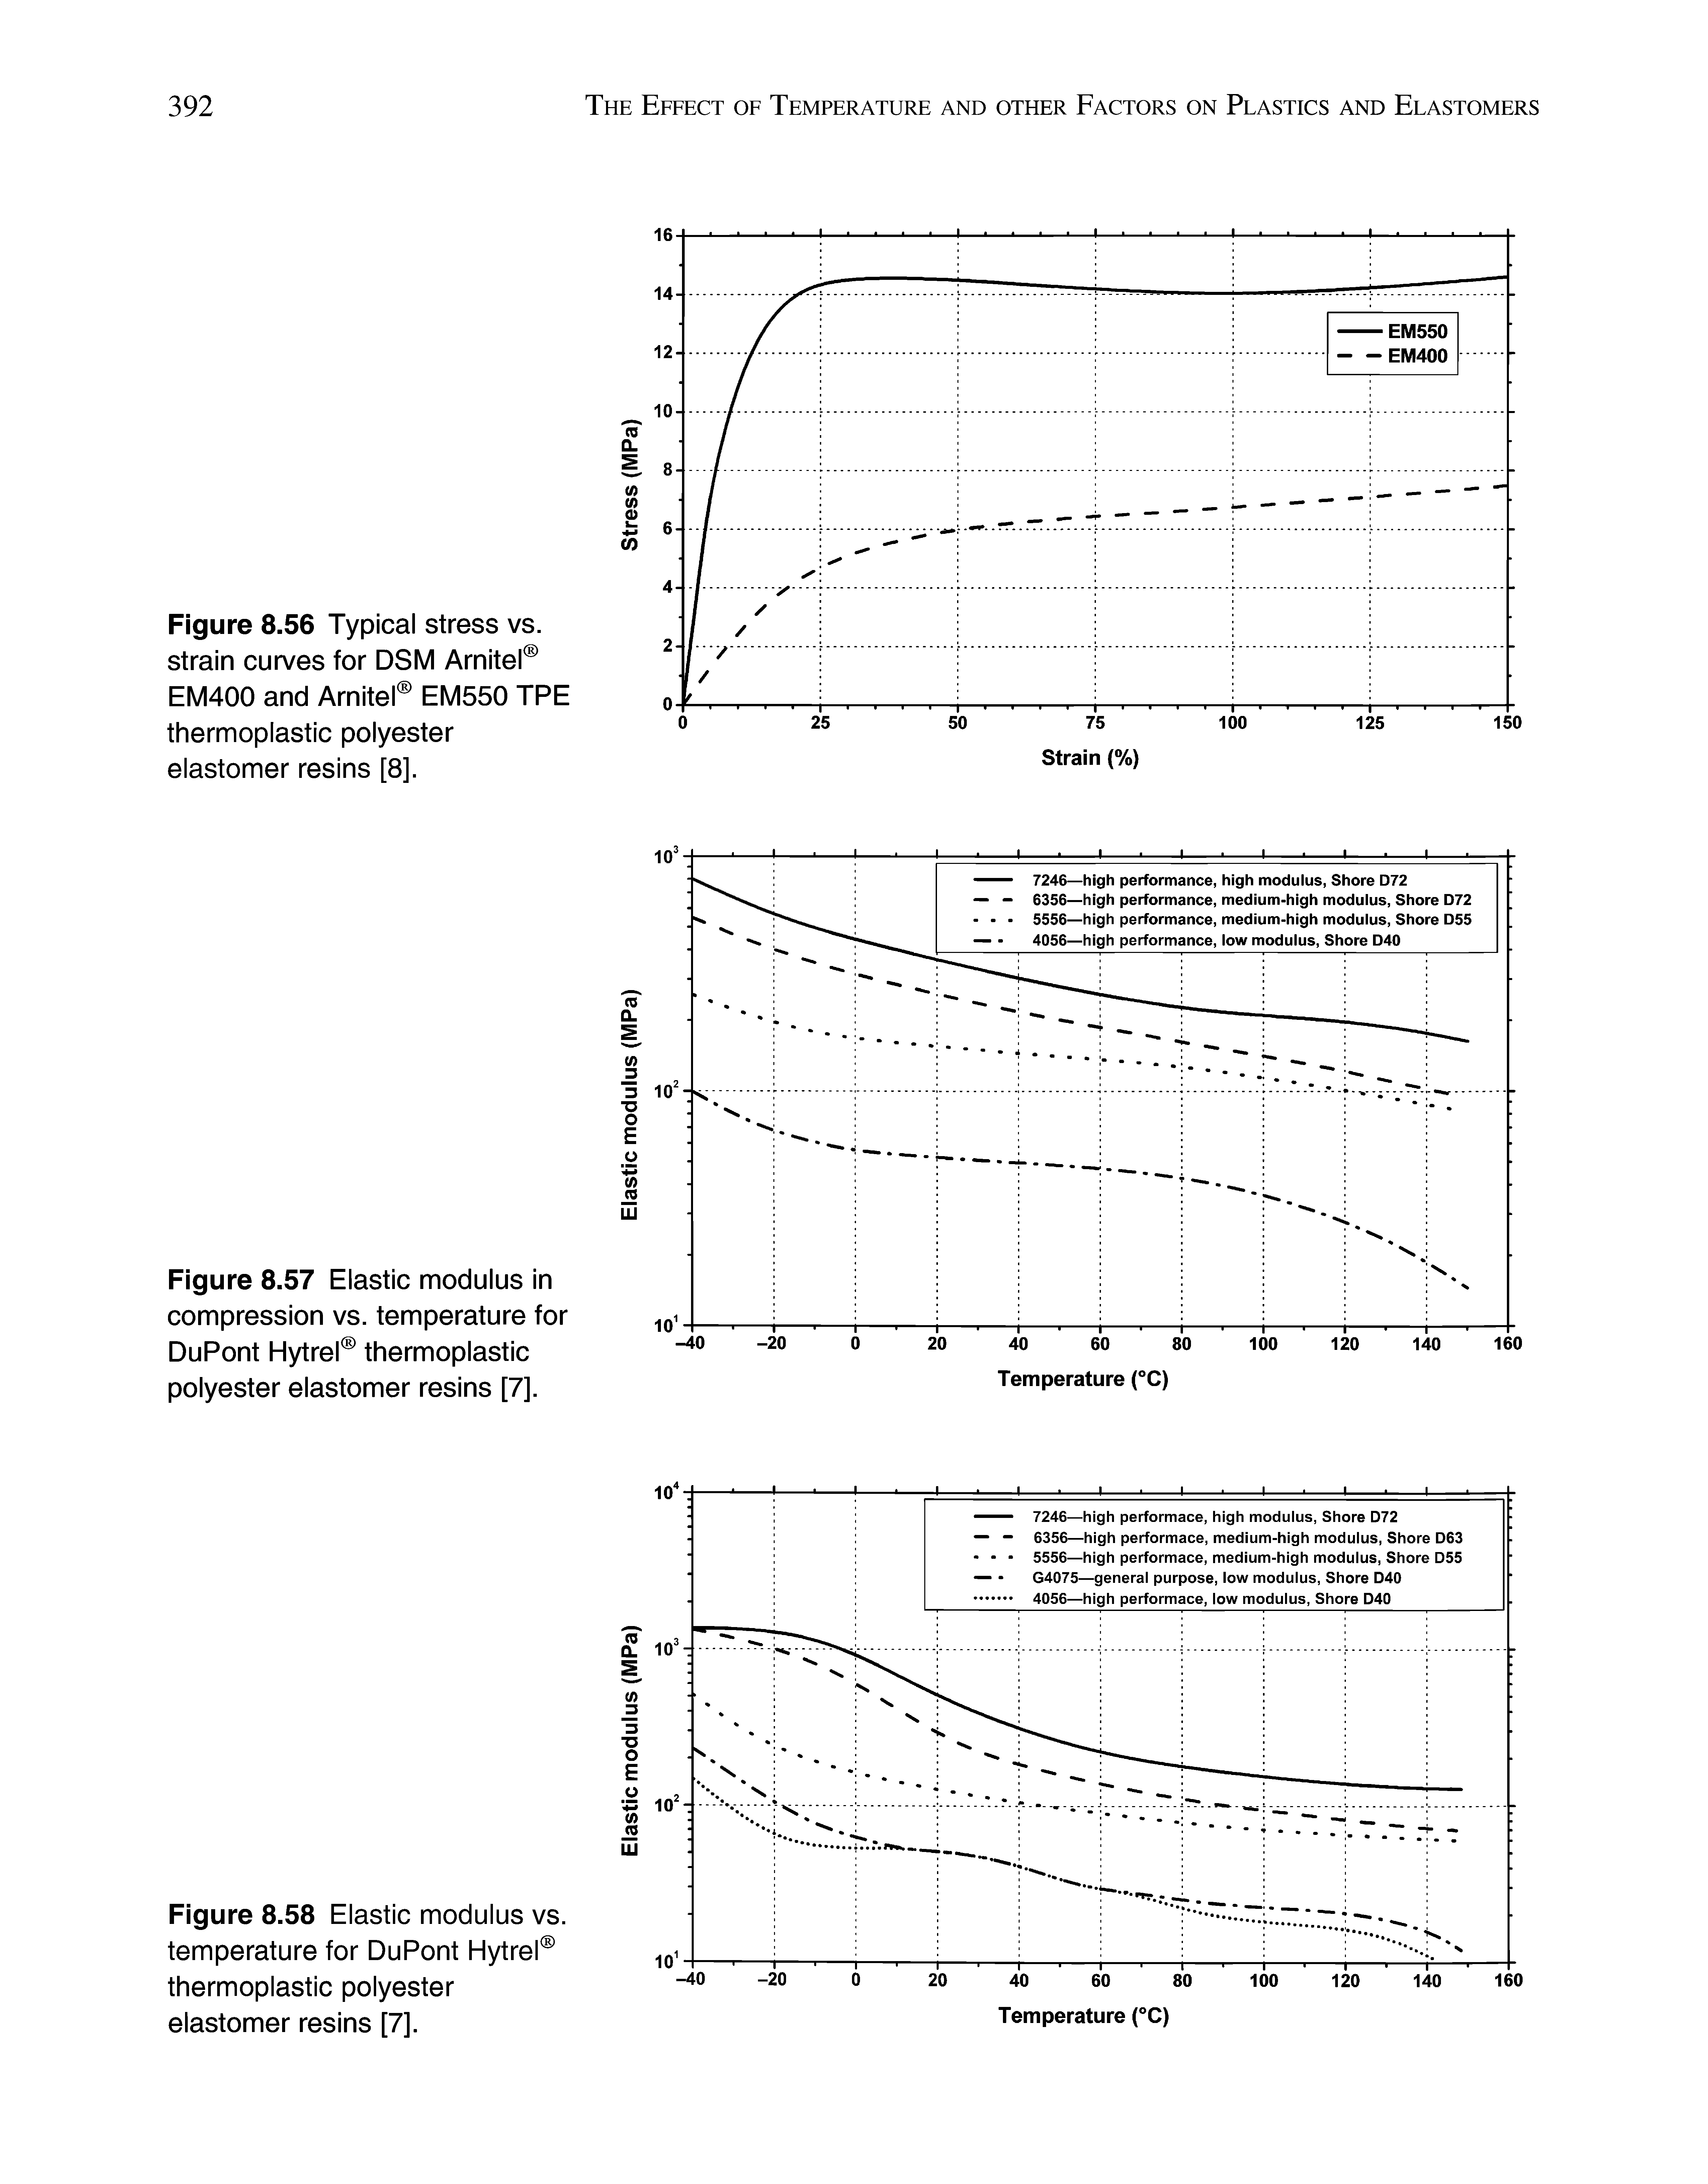 Figure 8.57 Elastic modulus in compression vs. temperature for DuPont Hytrel thermoplastic polyester elastomer resins [7].